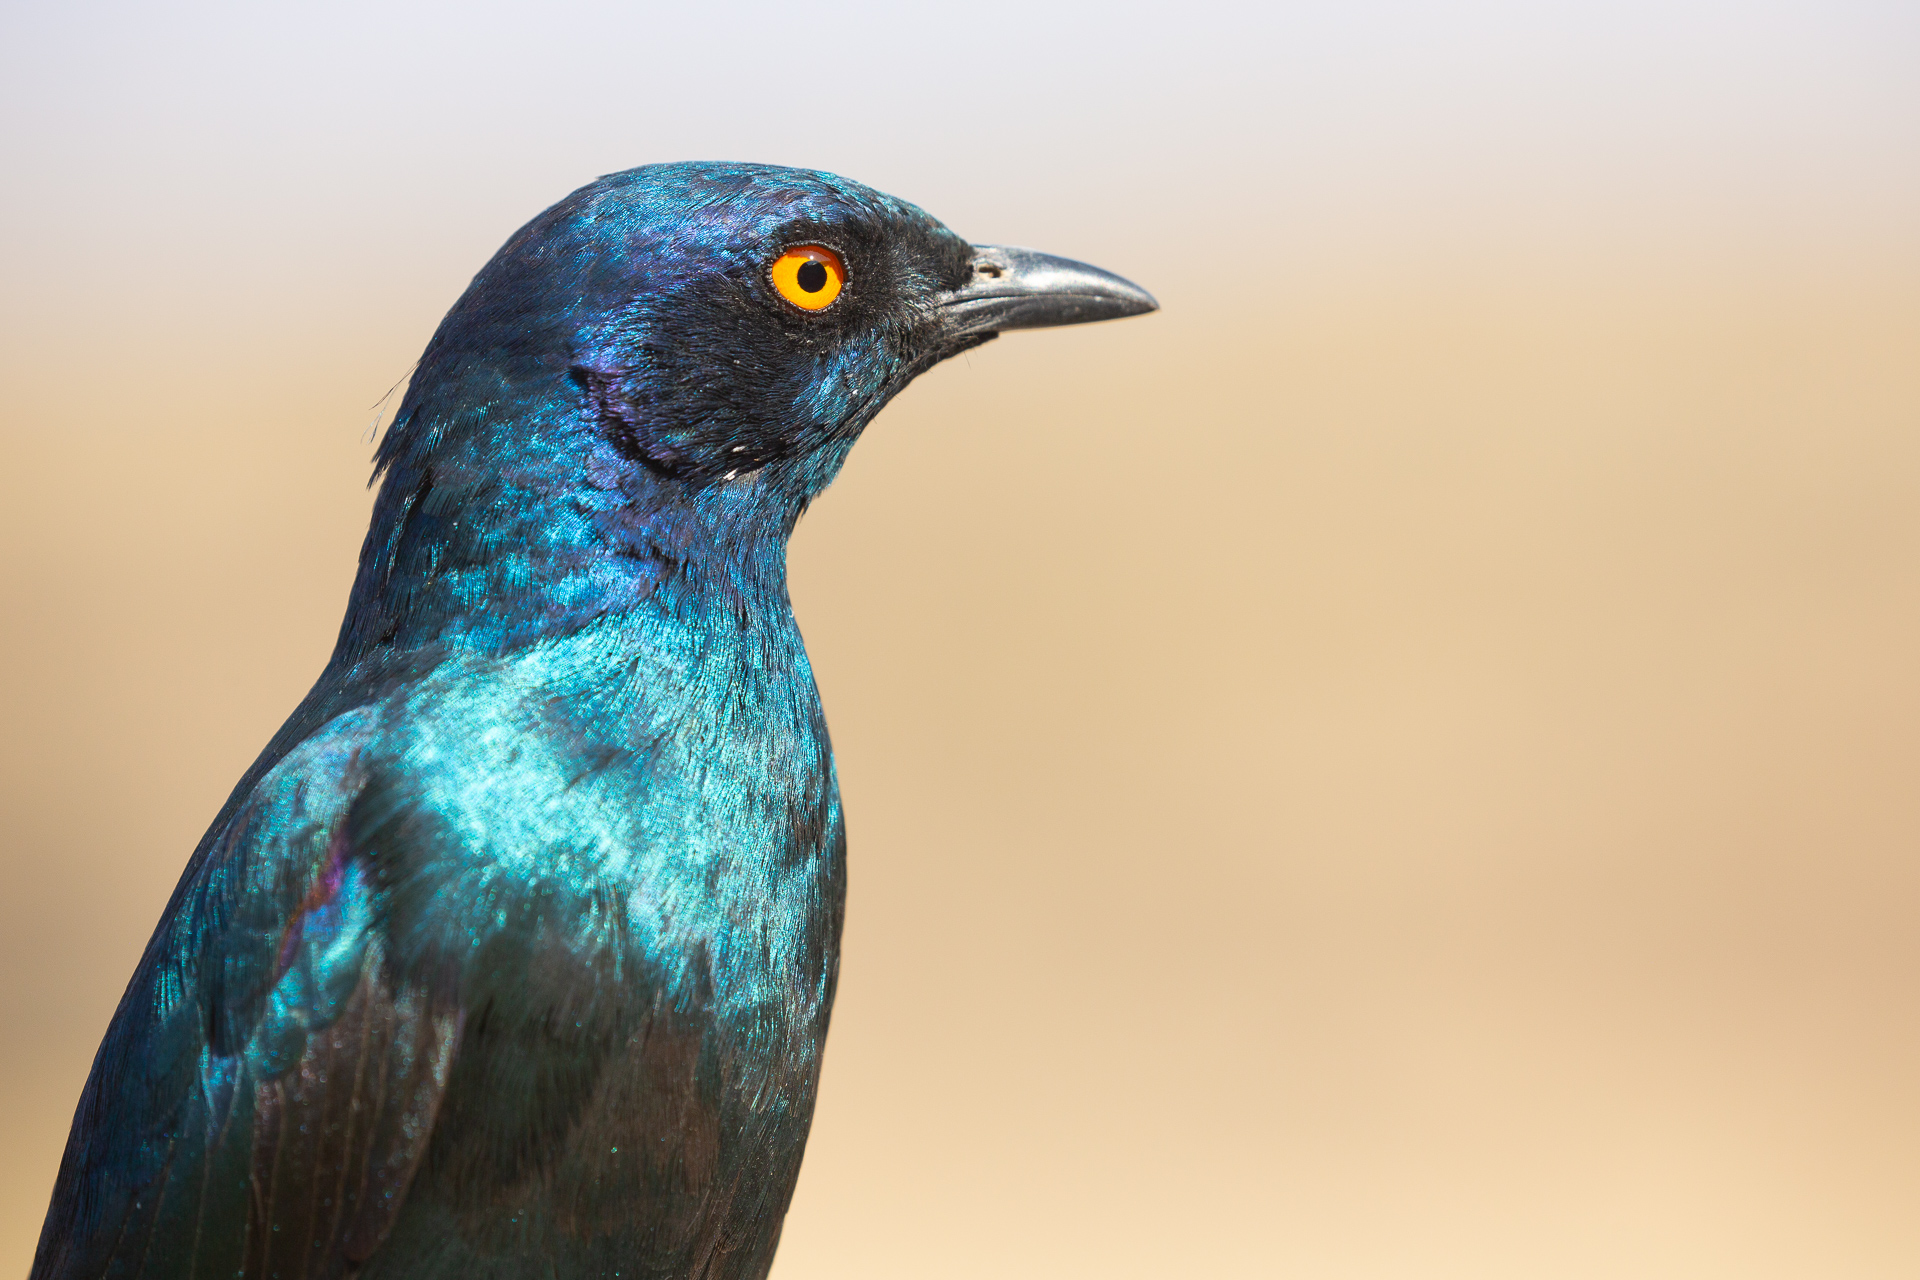 Cape Glossy Starling, South Africa